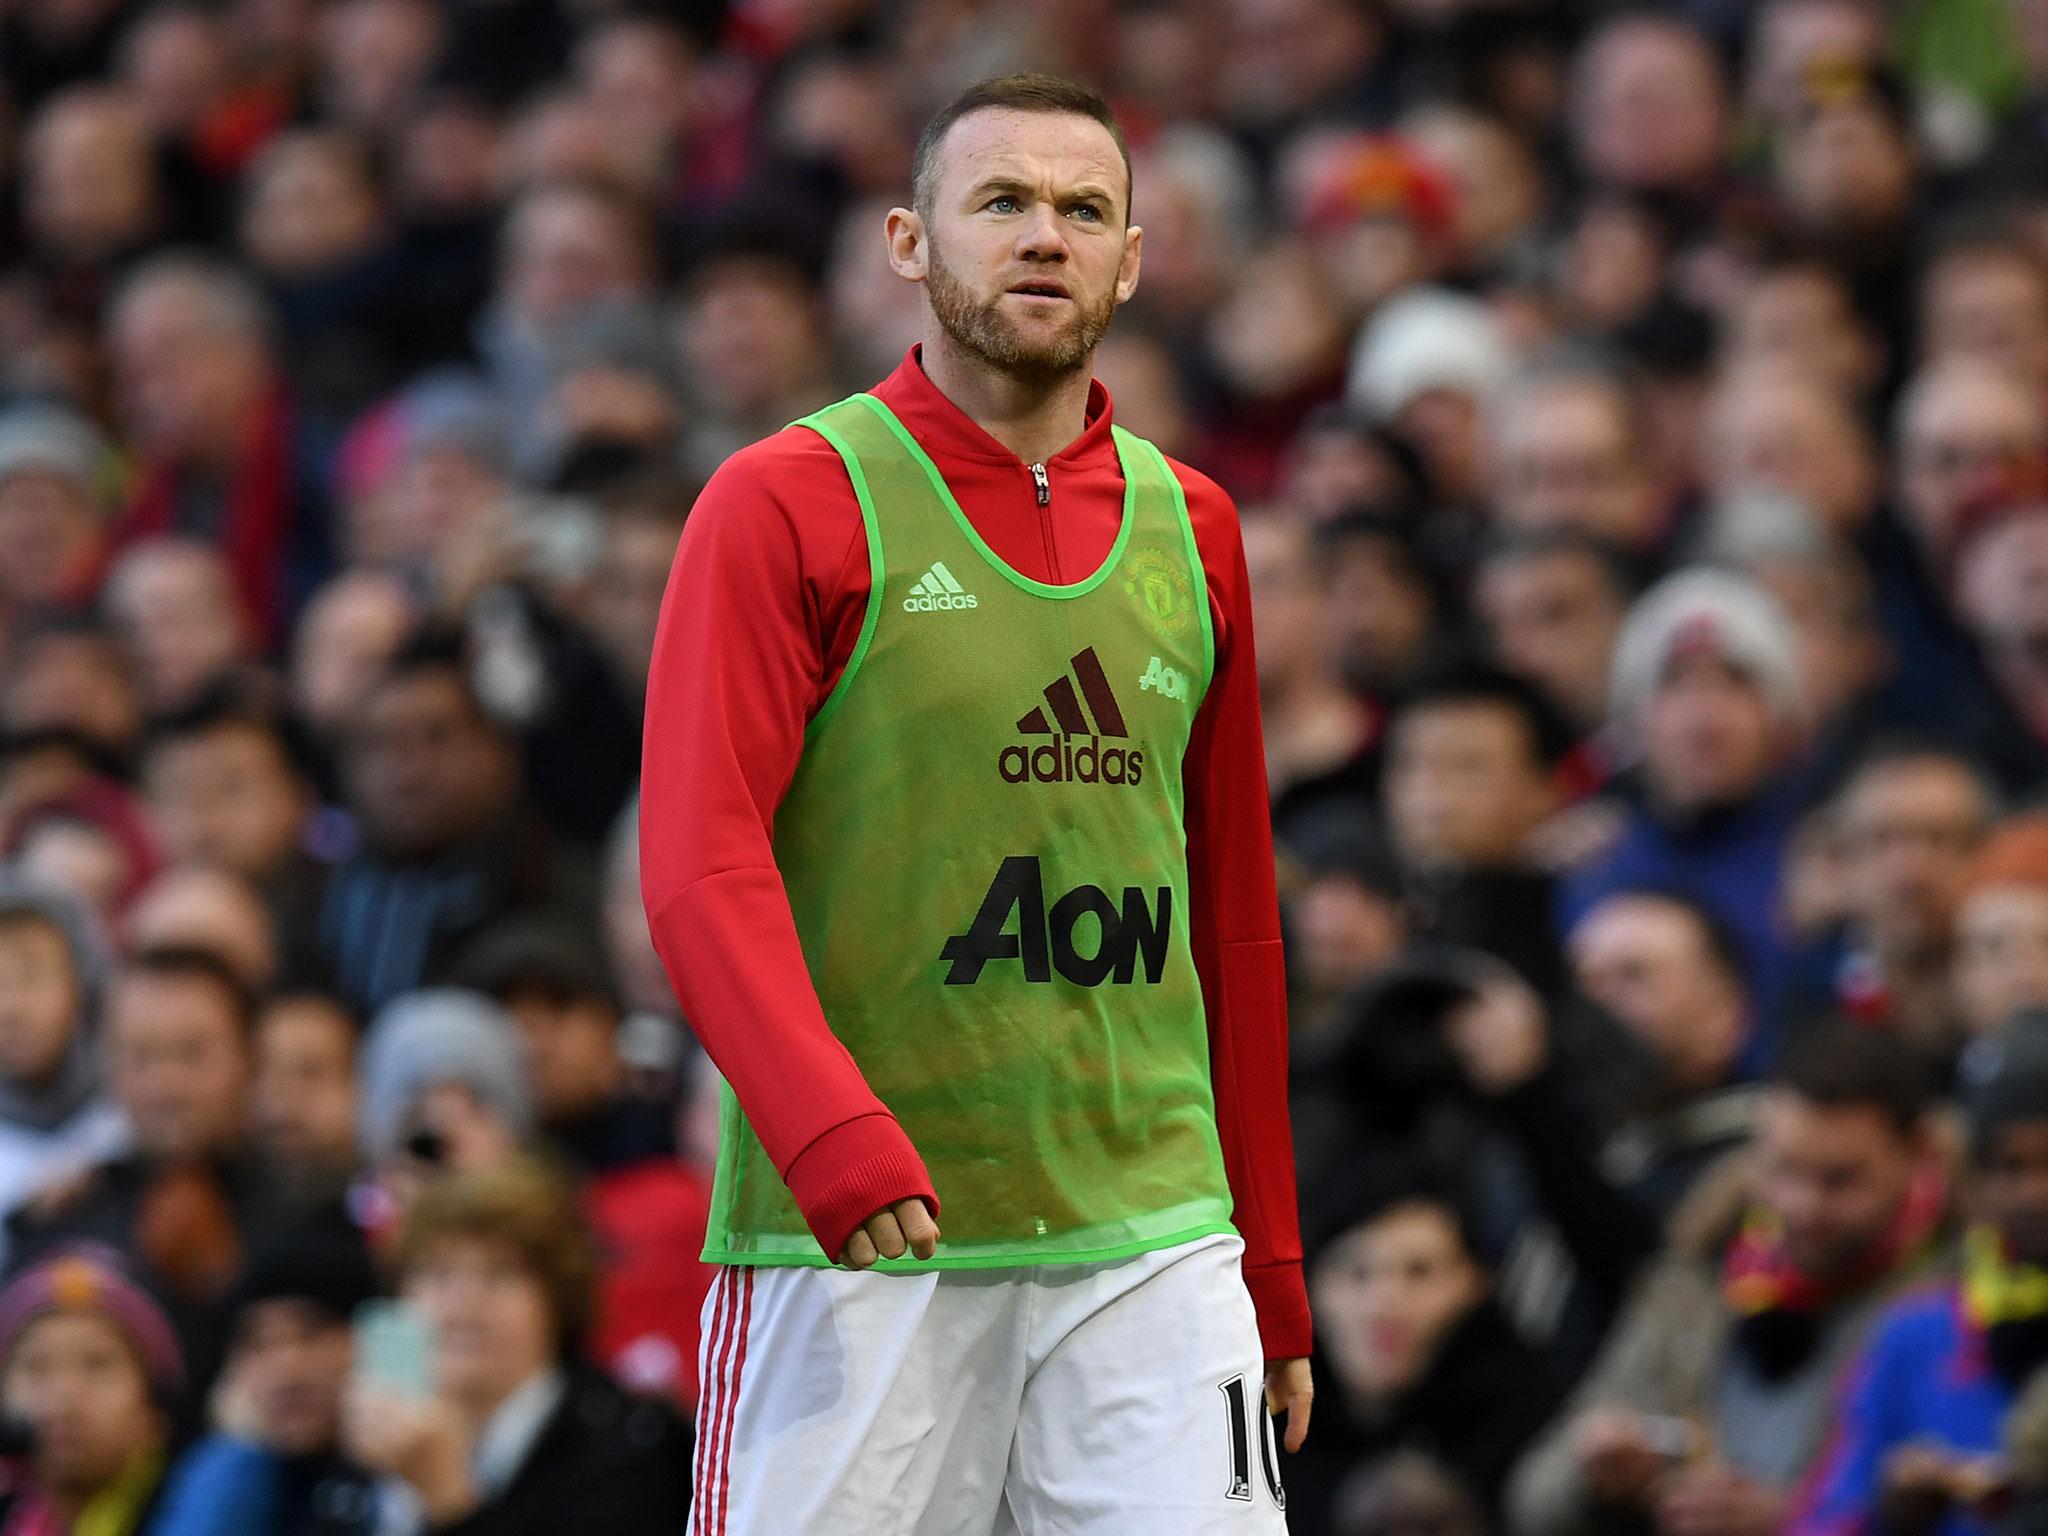 Wayne Rooney believes the way he has been treated by the media is 'disgraceful'